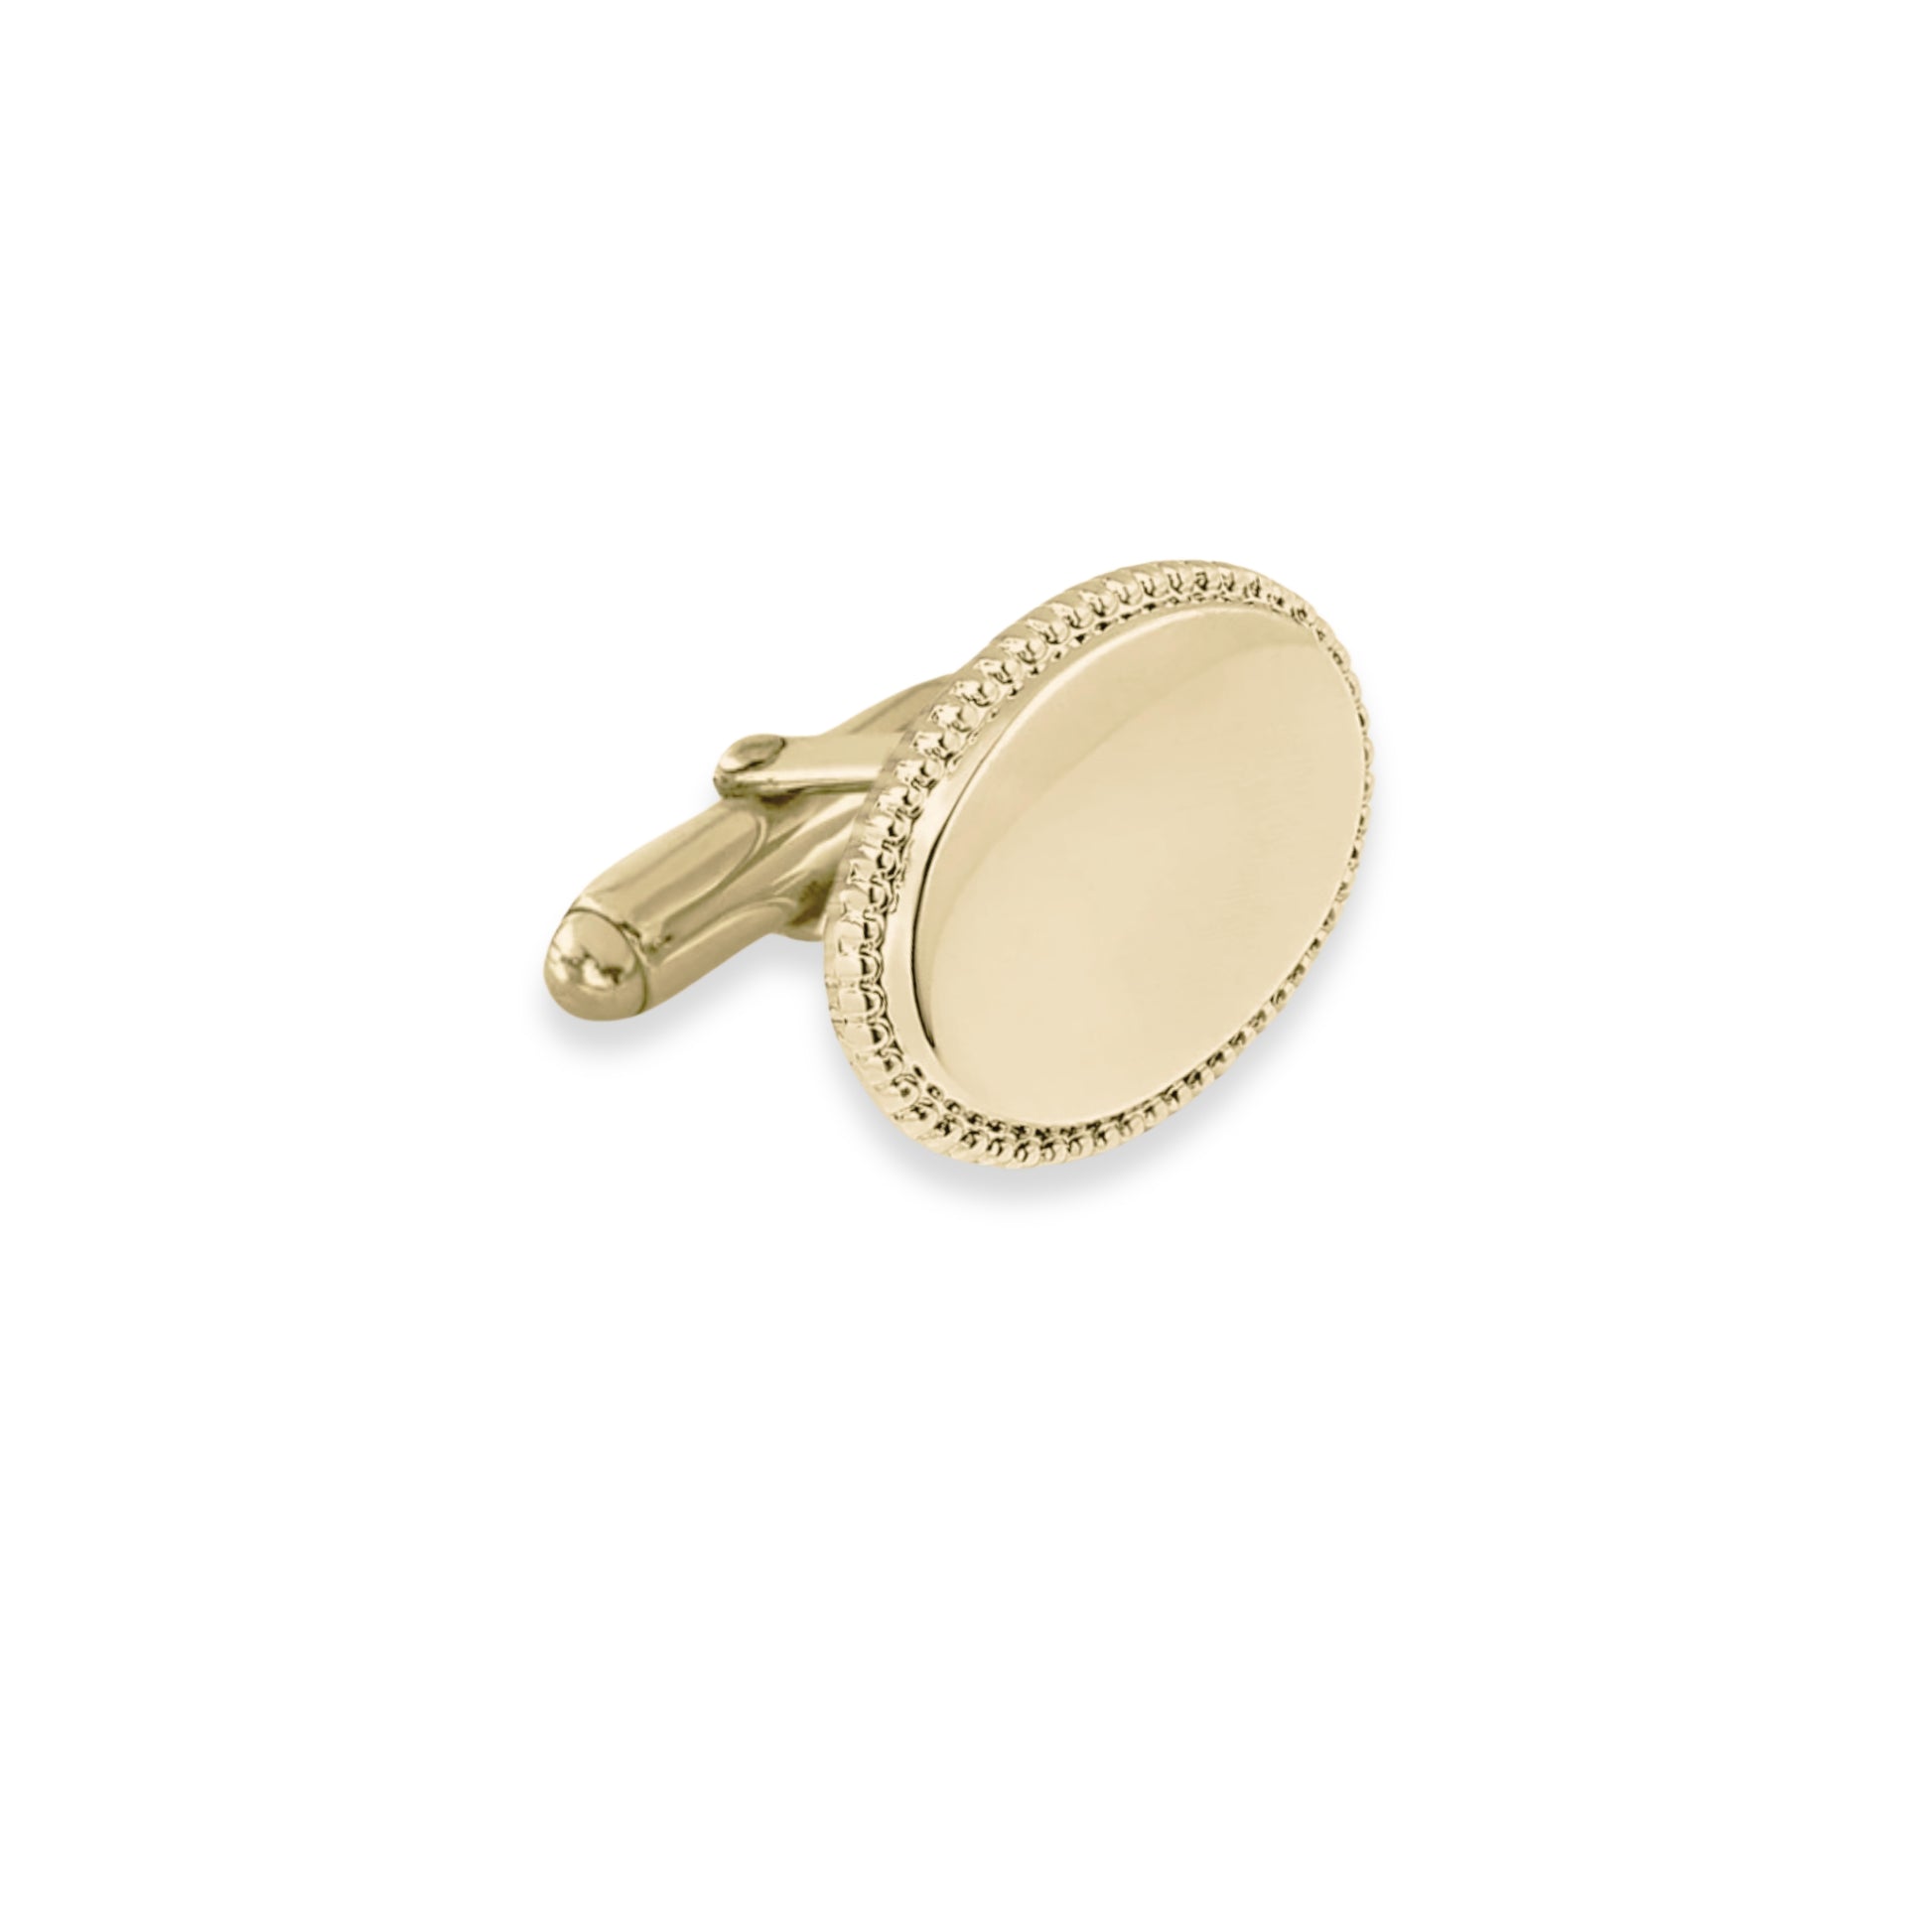 14K Gold Oval Cufflinks with Beaded Edge